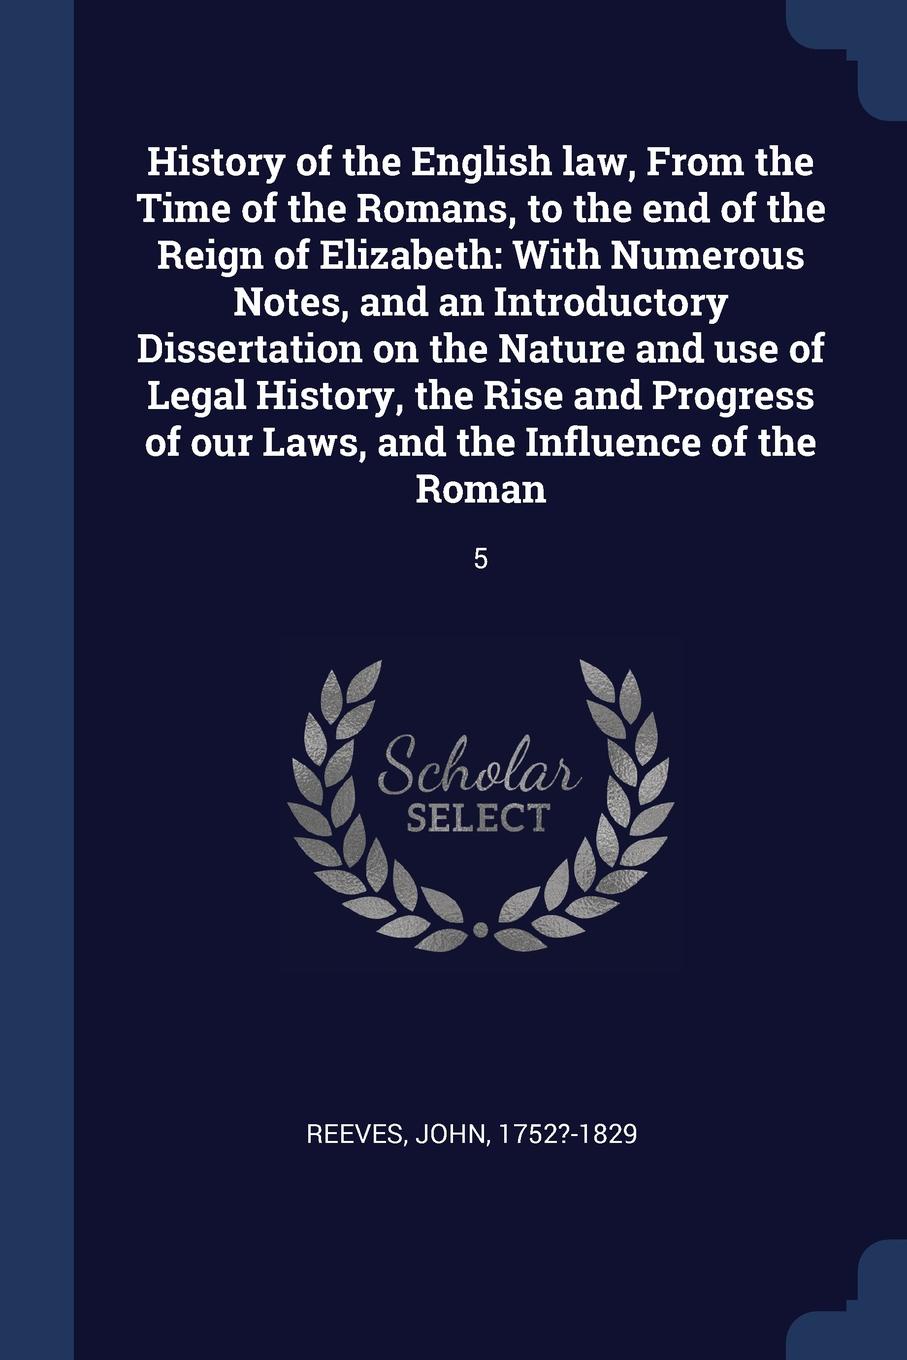 History of the English law, From the Time of the Romans, to the end of the Reign of Elizabeth. With Numerous Notes, and an Introductory Dissertation on the Nature and use of Legal History, the Rise and Progress of our Laws, and the Influence of th...